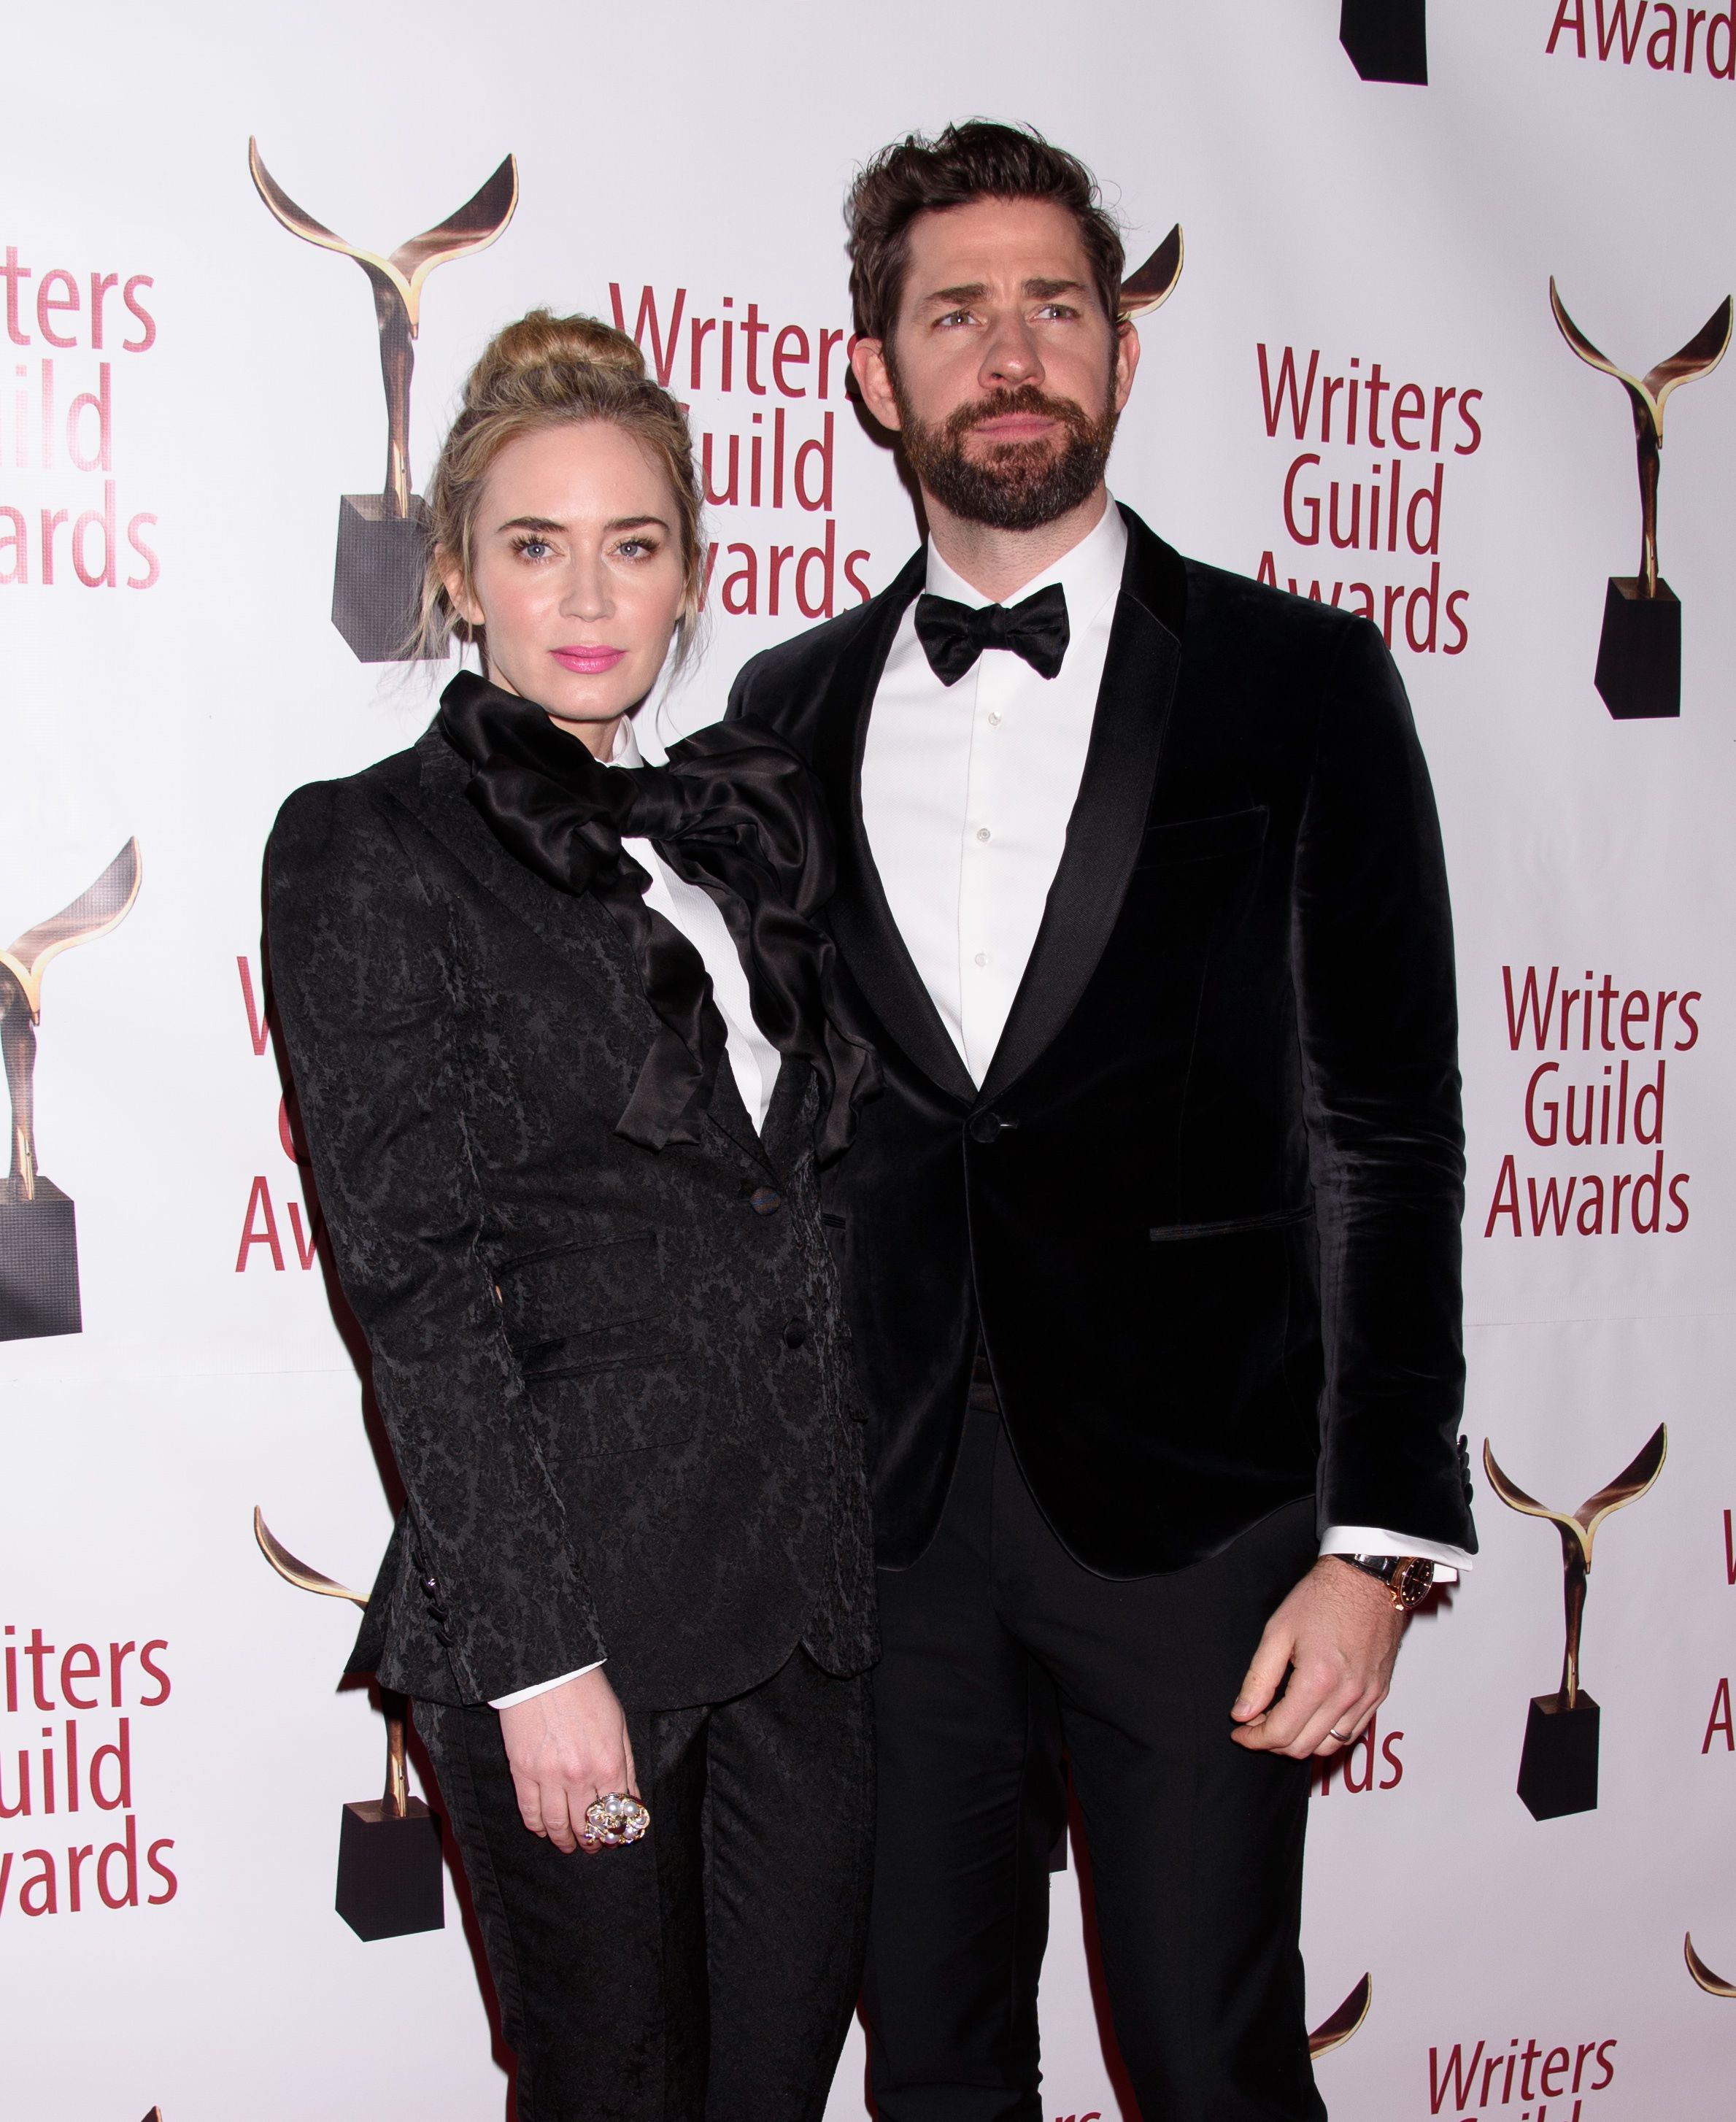 2019-02-17-71st-Annual-Writers-Guild-Awards-080.jpg